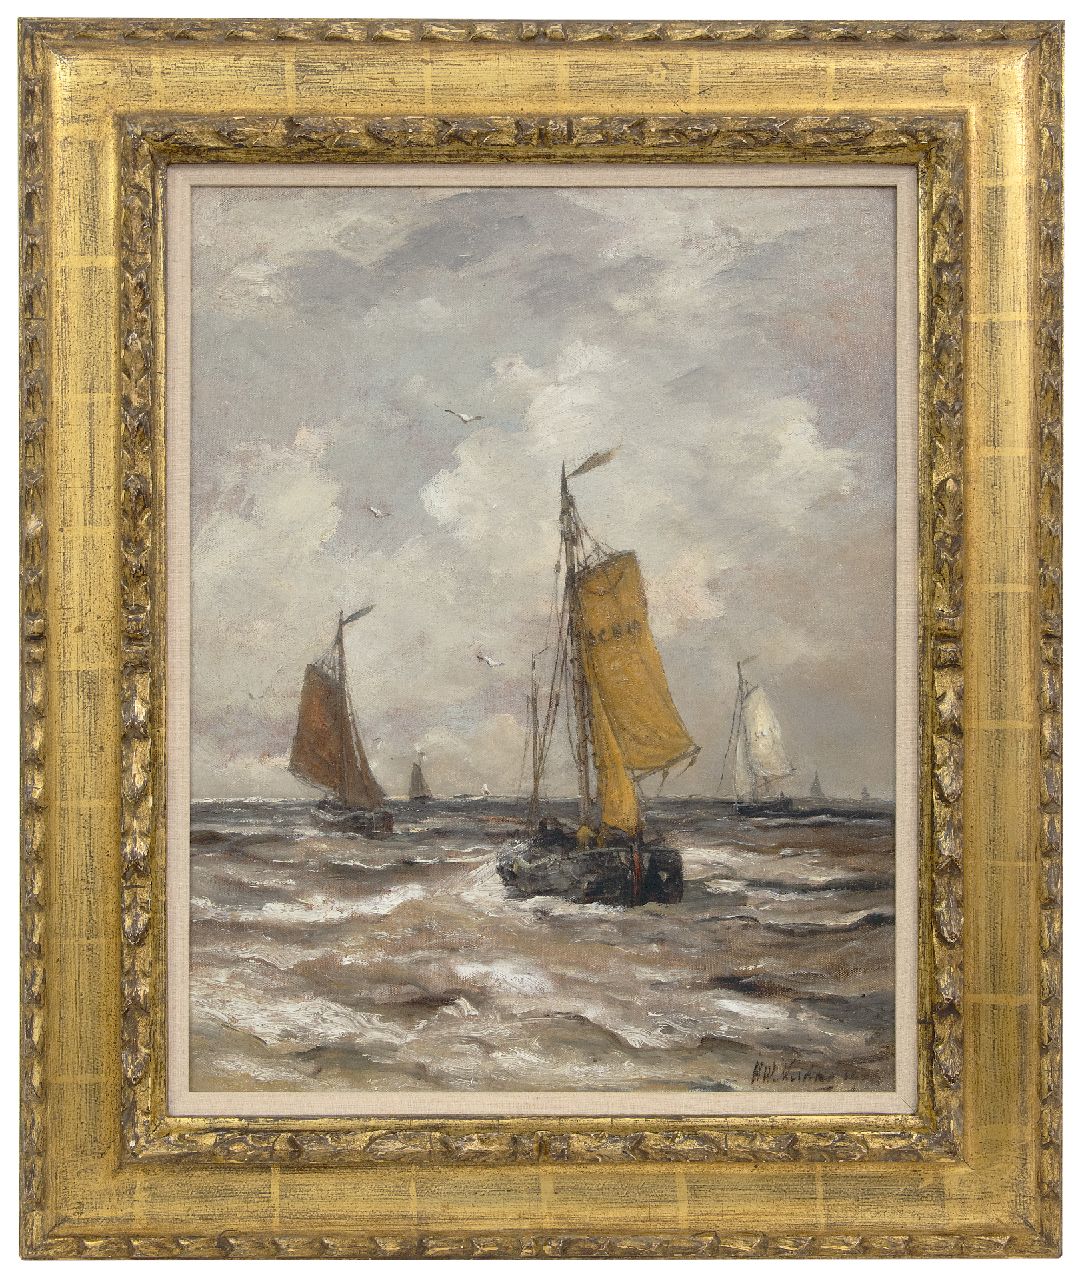 Mesdag H.W.  | Hendrik Willem Mesdag | Paintings offered for sale | Returning from the fishing grounds, oil on canvas 50.7 x 40.0 cm, signed l.r. and dated 190(..)